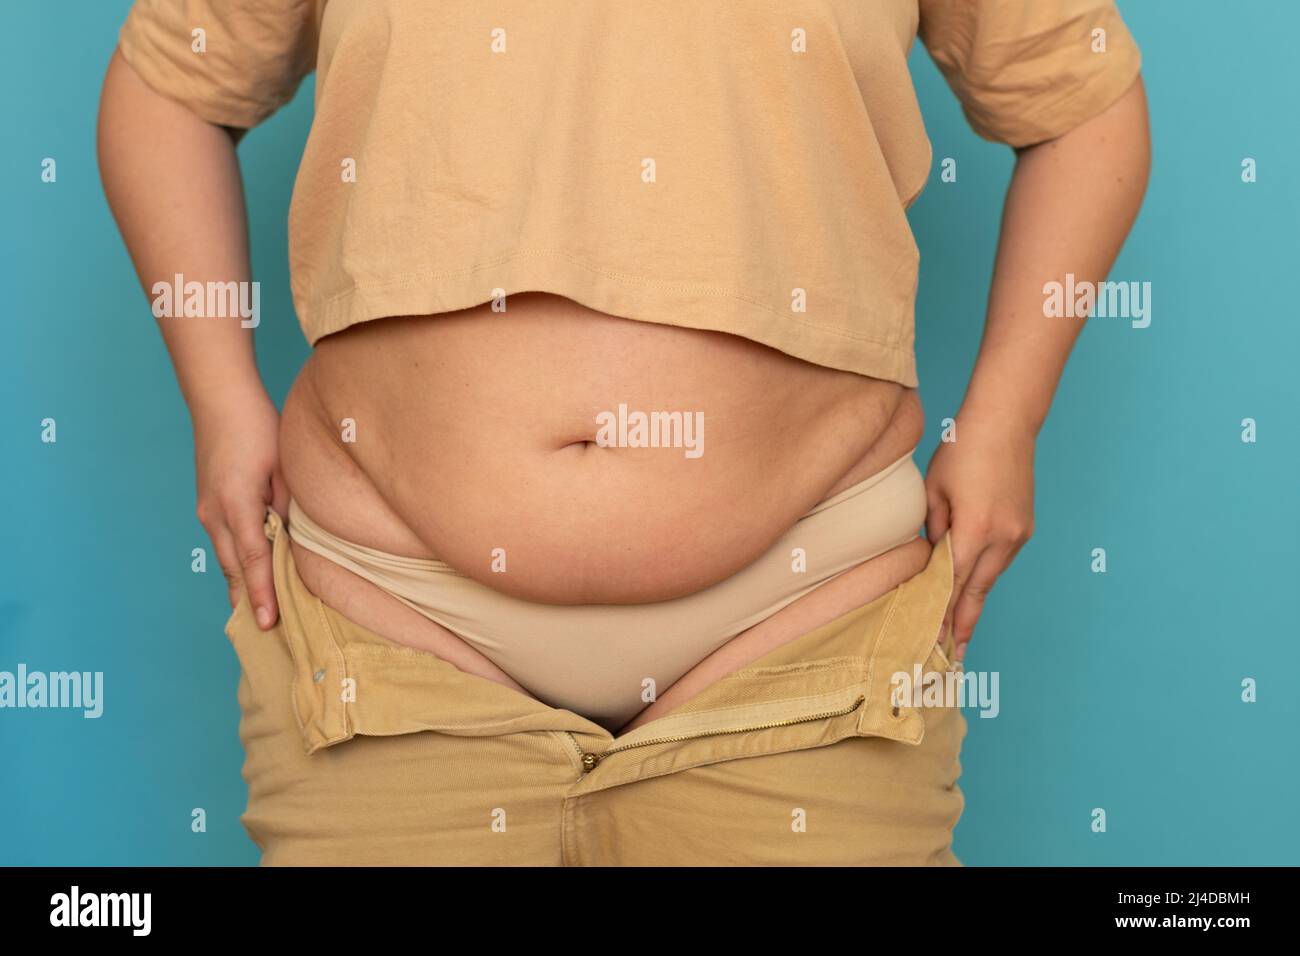 Unrecognizable plump woman wearing beige T-shirt, pulling on unzipped jeans, showing excess belly on blue background. Stock Photo